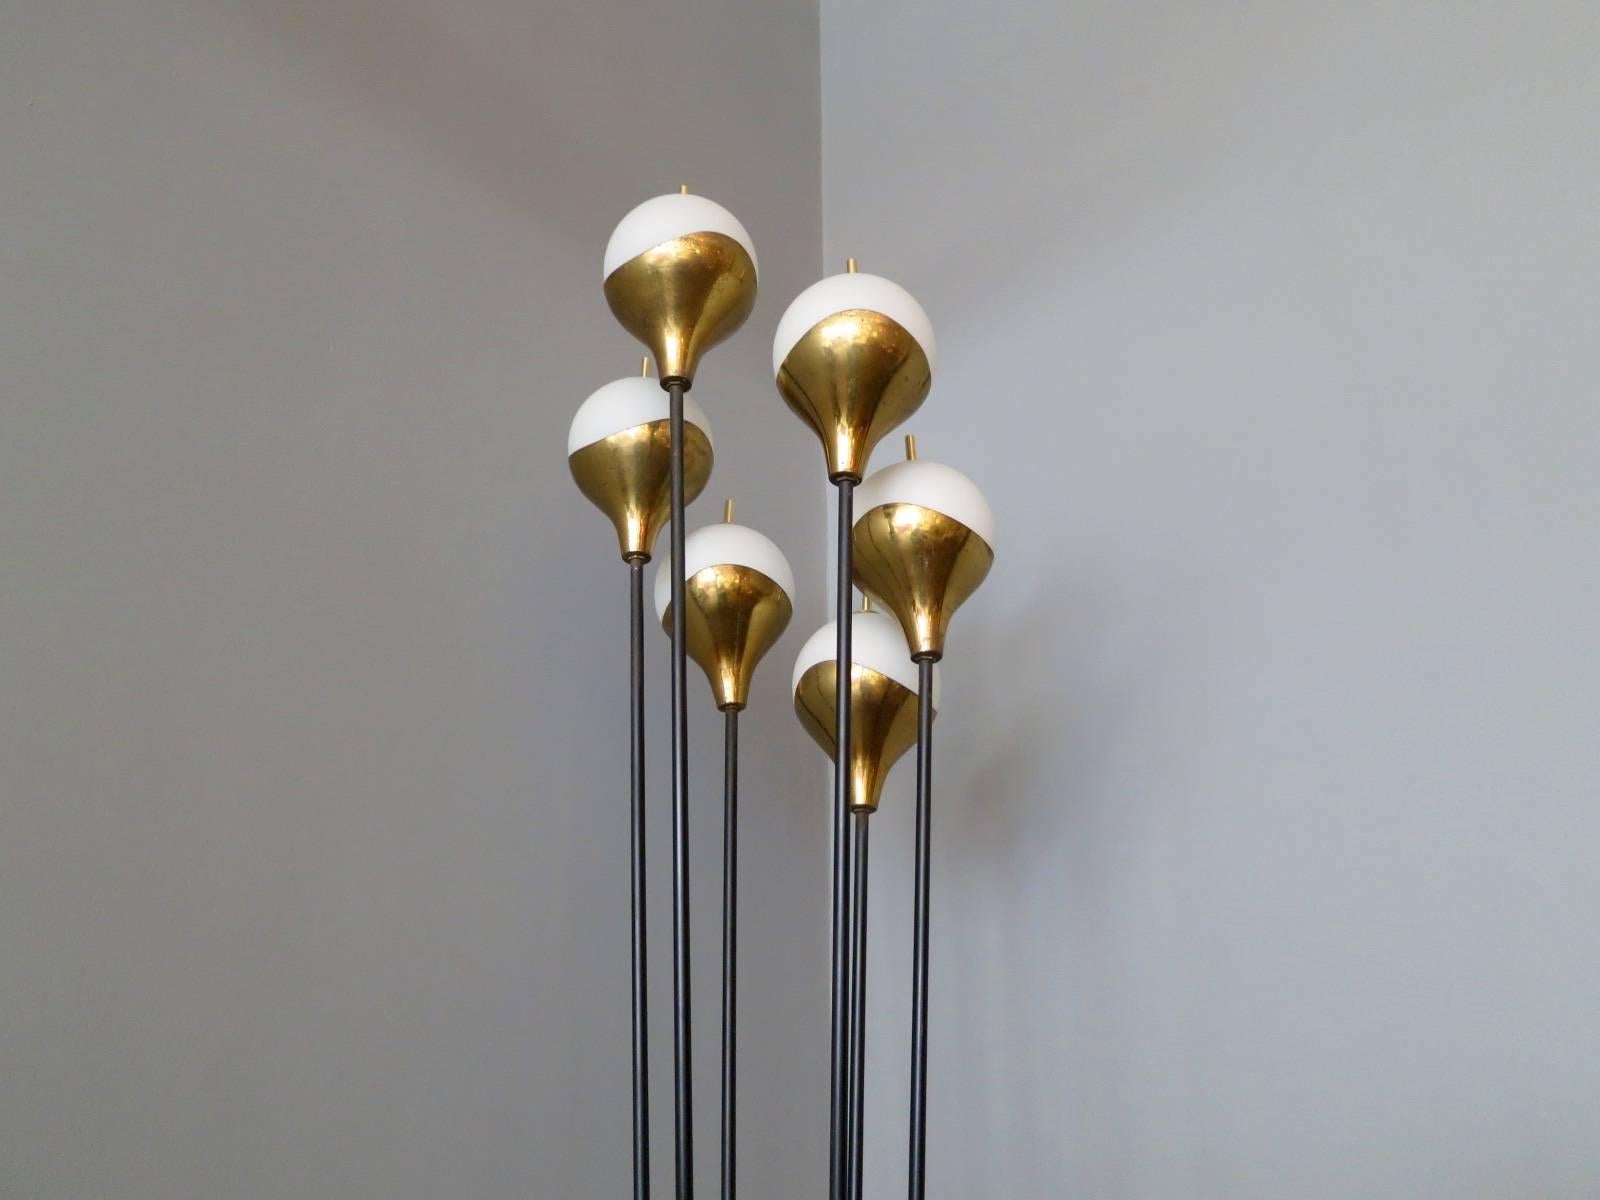 An elegant six light floor lamp by renowned Italian production company Stilnovo. A rare model with curved brass cups holding six opaque glass diffuser with brass finial tops. The black tell arms supported by a brass ring. The white marble base with